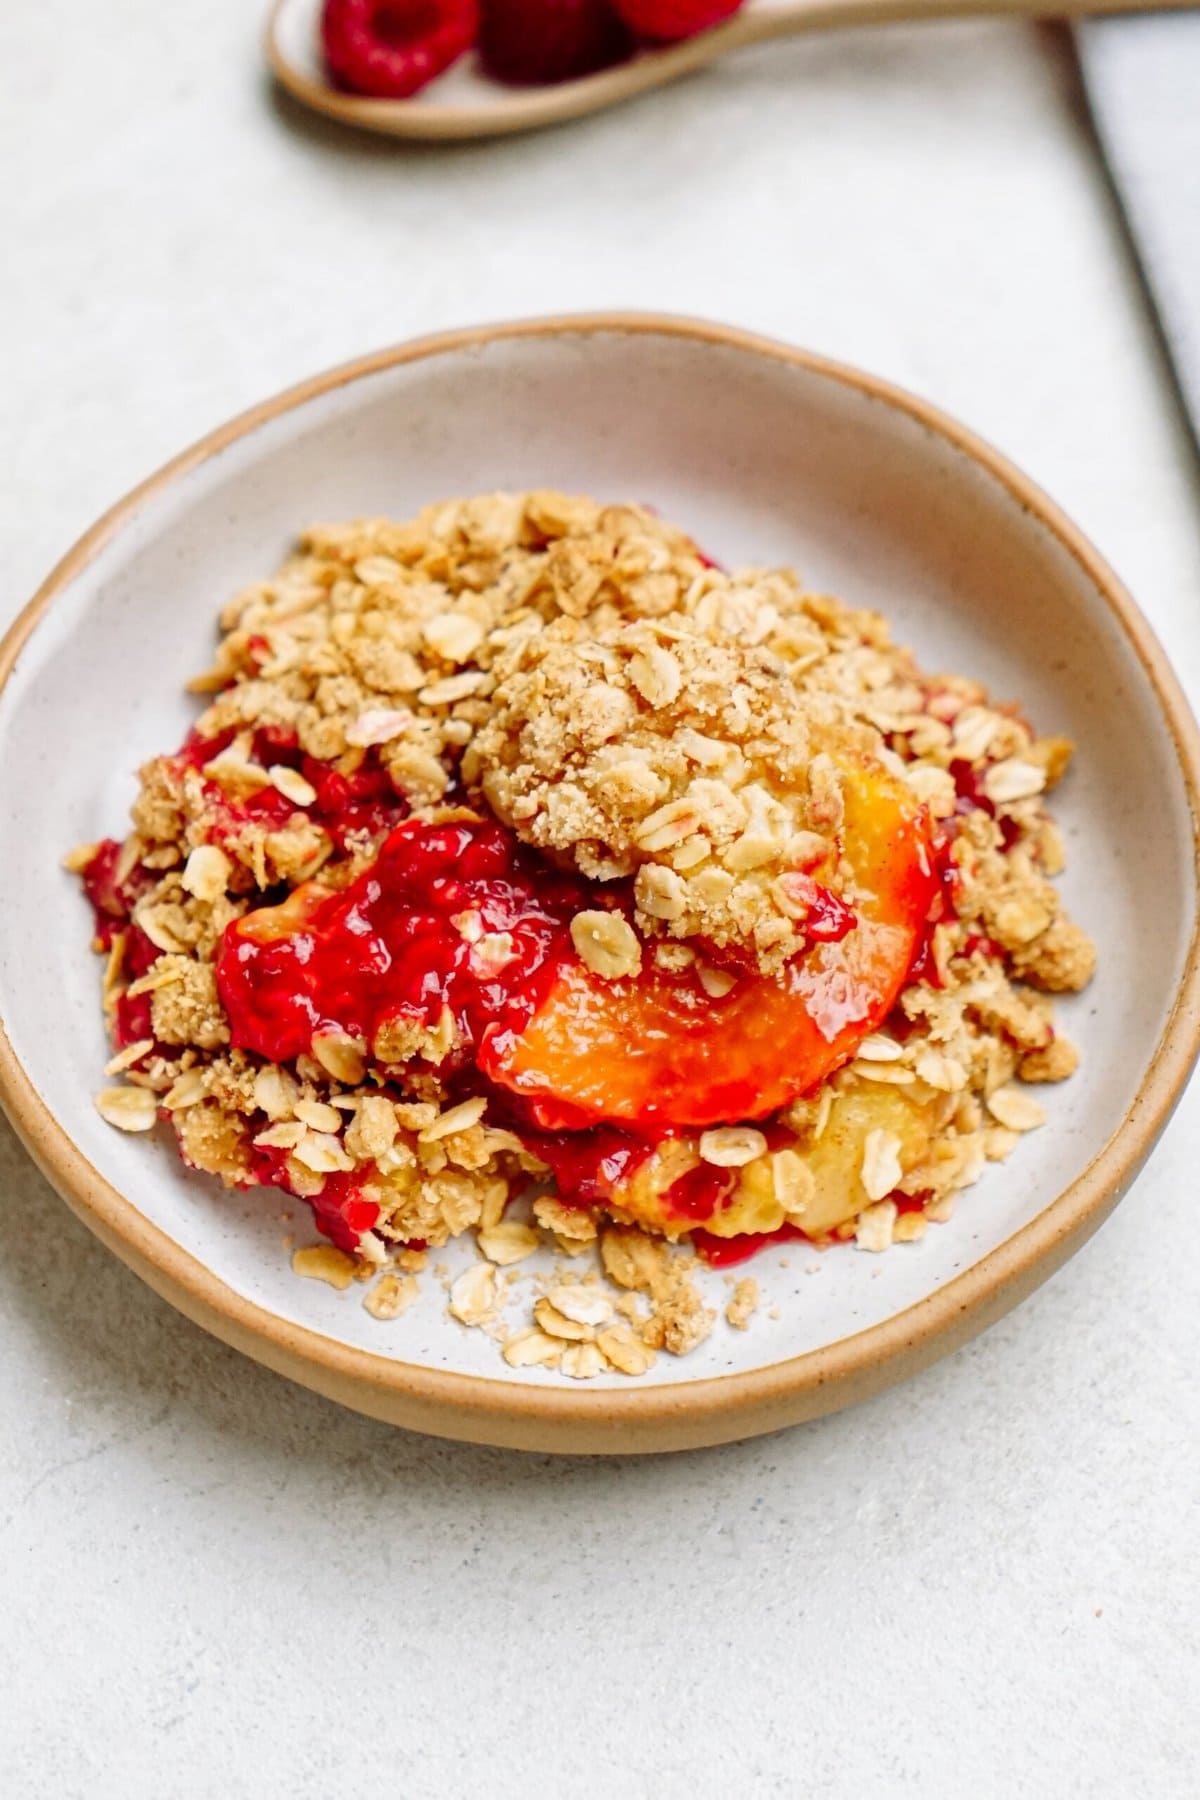 A plate of peach and raspberry crumble with a spoonful of raspberries in the background resembles a delightful raspberry cobbler.